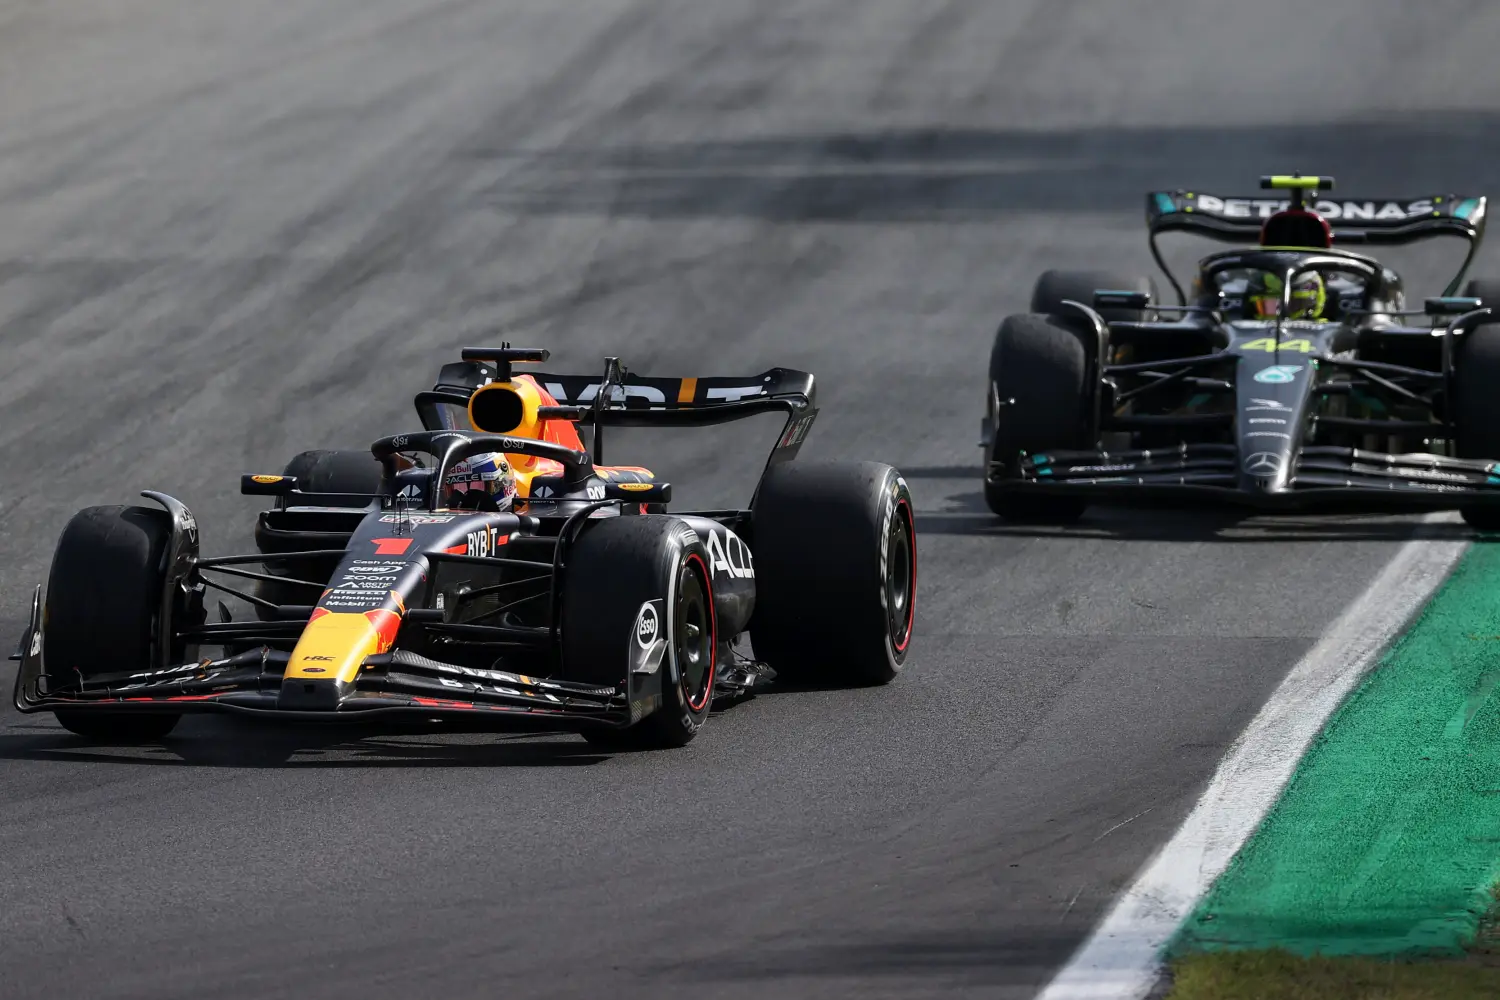 Max Verstappen i Lewis Hamilton / © Getty Images / Red Bull Content Pool